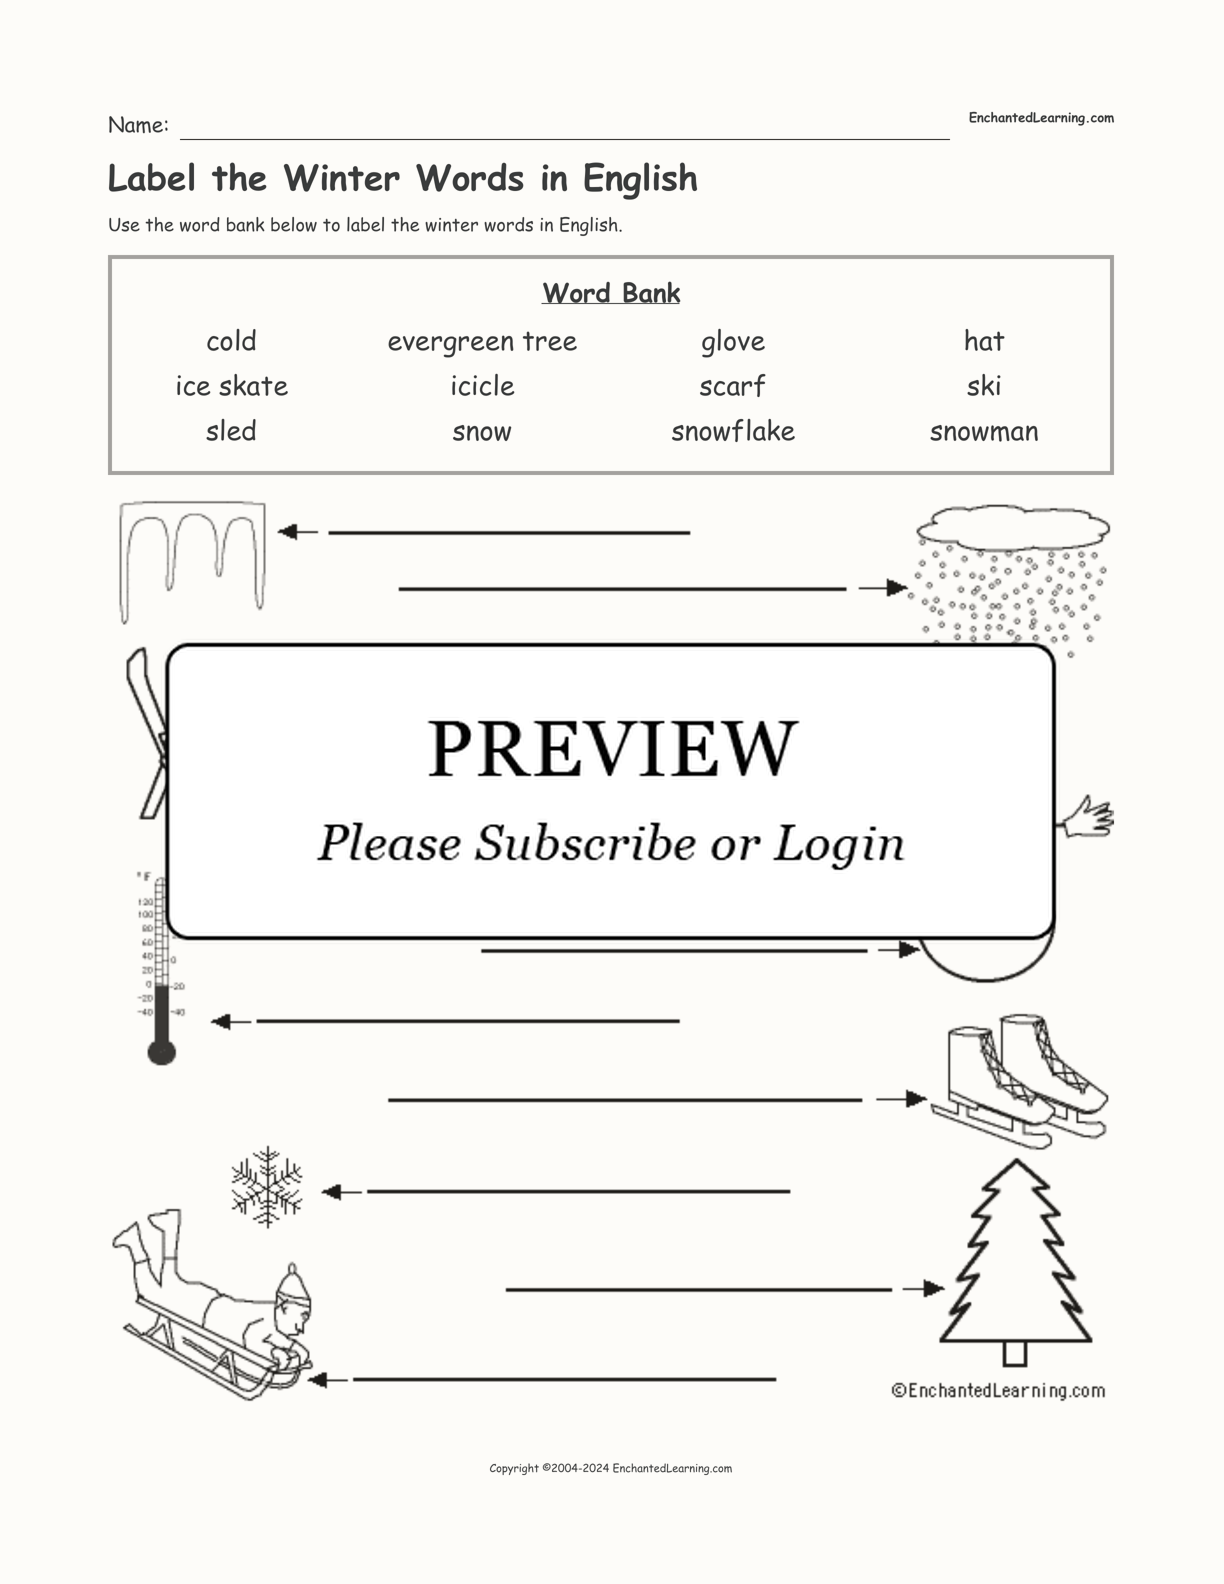 Label the Winter Words in English interactive worksheet page 1